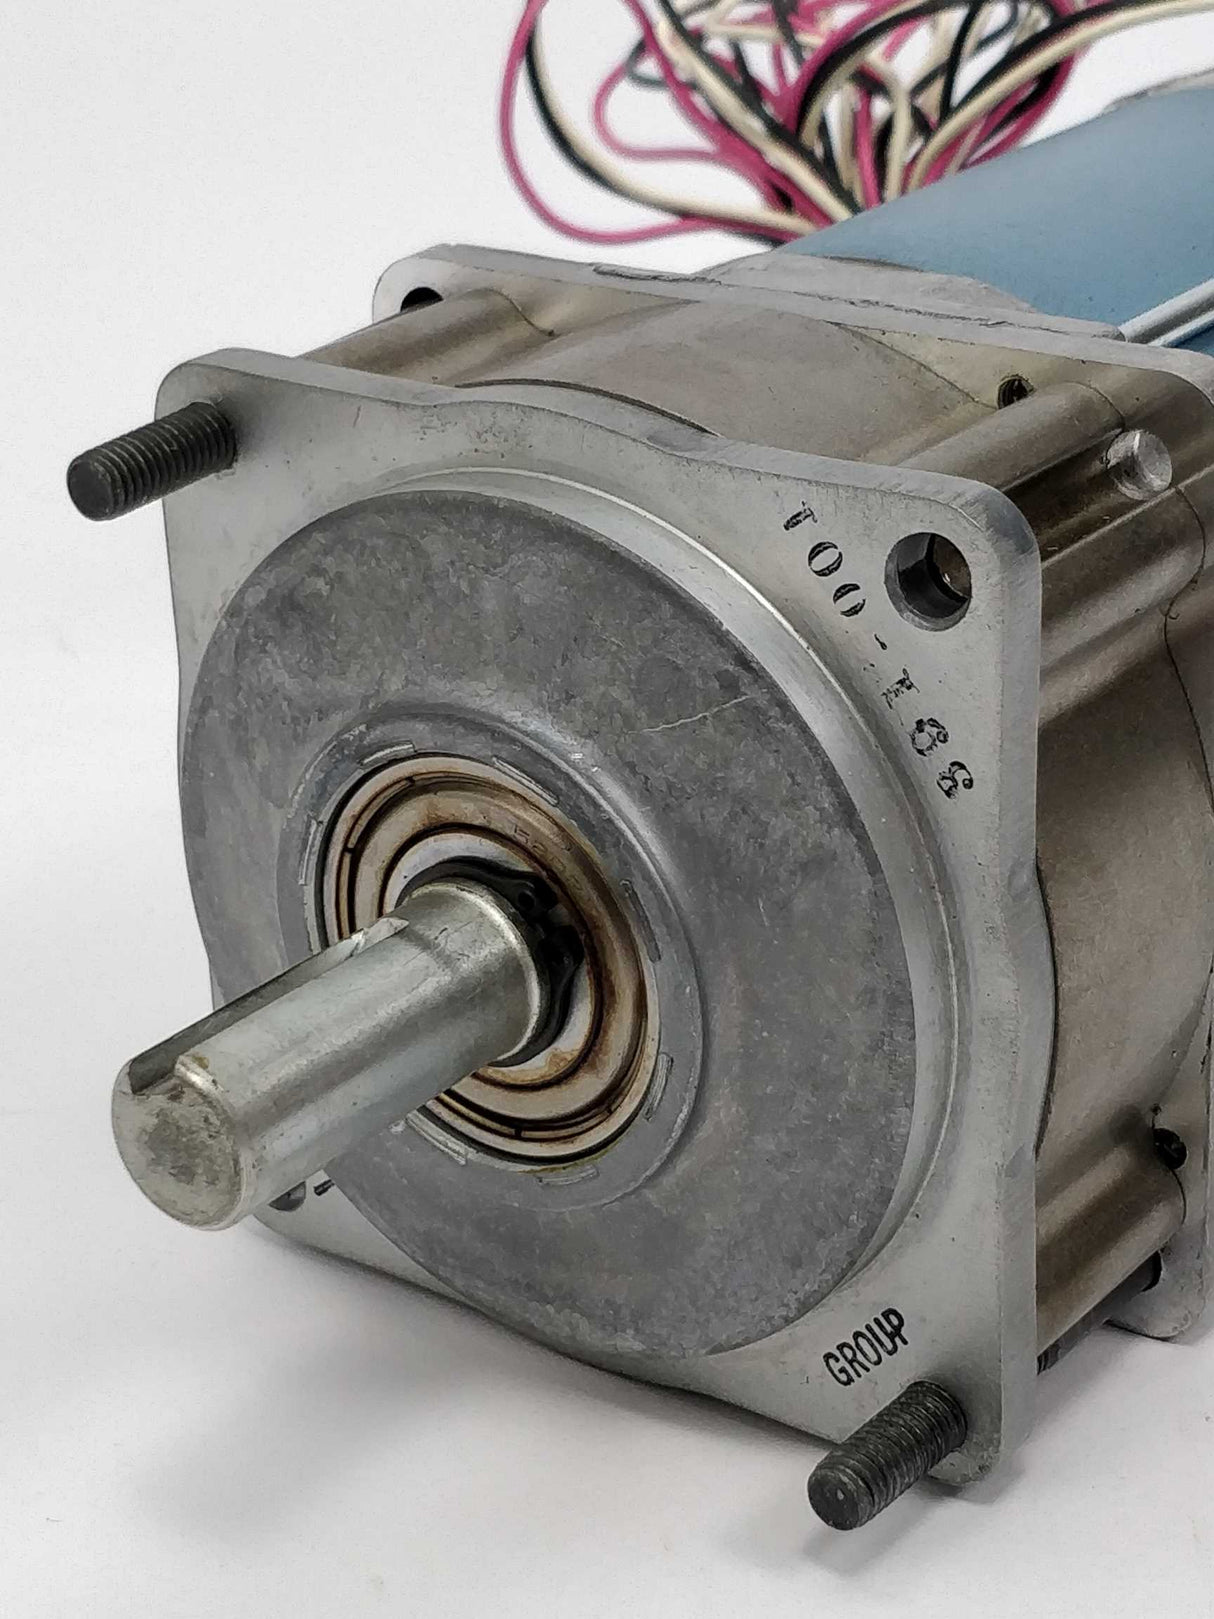 Superior Electric SS451-1026 Slo-syn motor synchronous motor